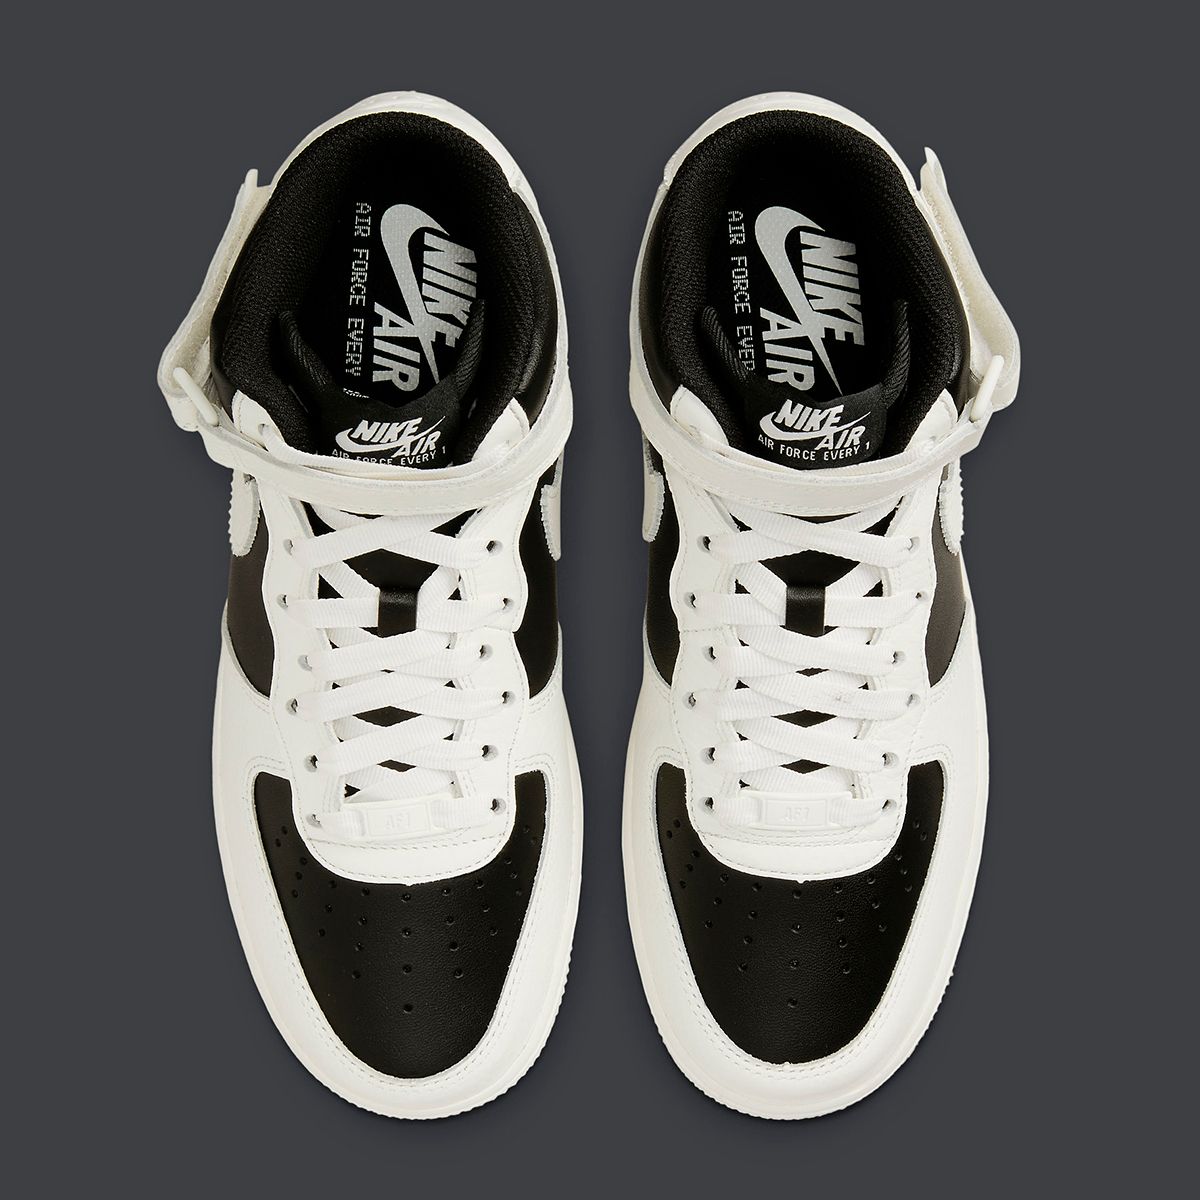 Nike Air Force 1 Mid “Reverse Panda” Releases July 27 | House of ...